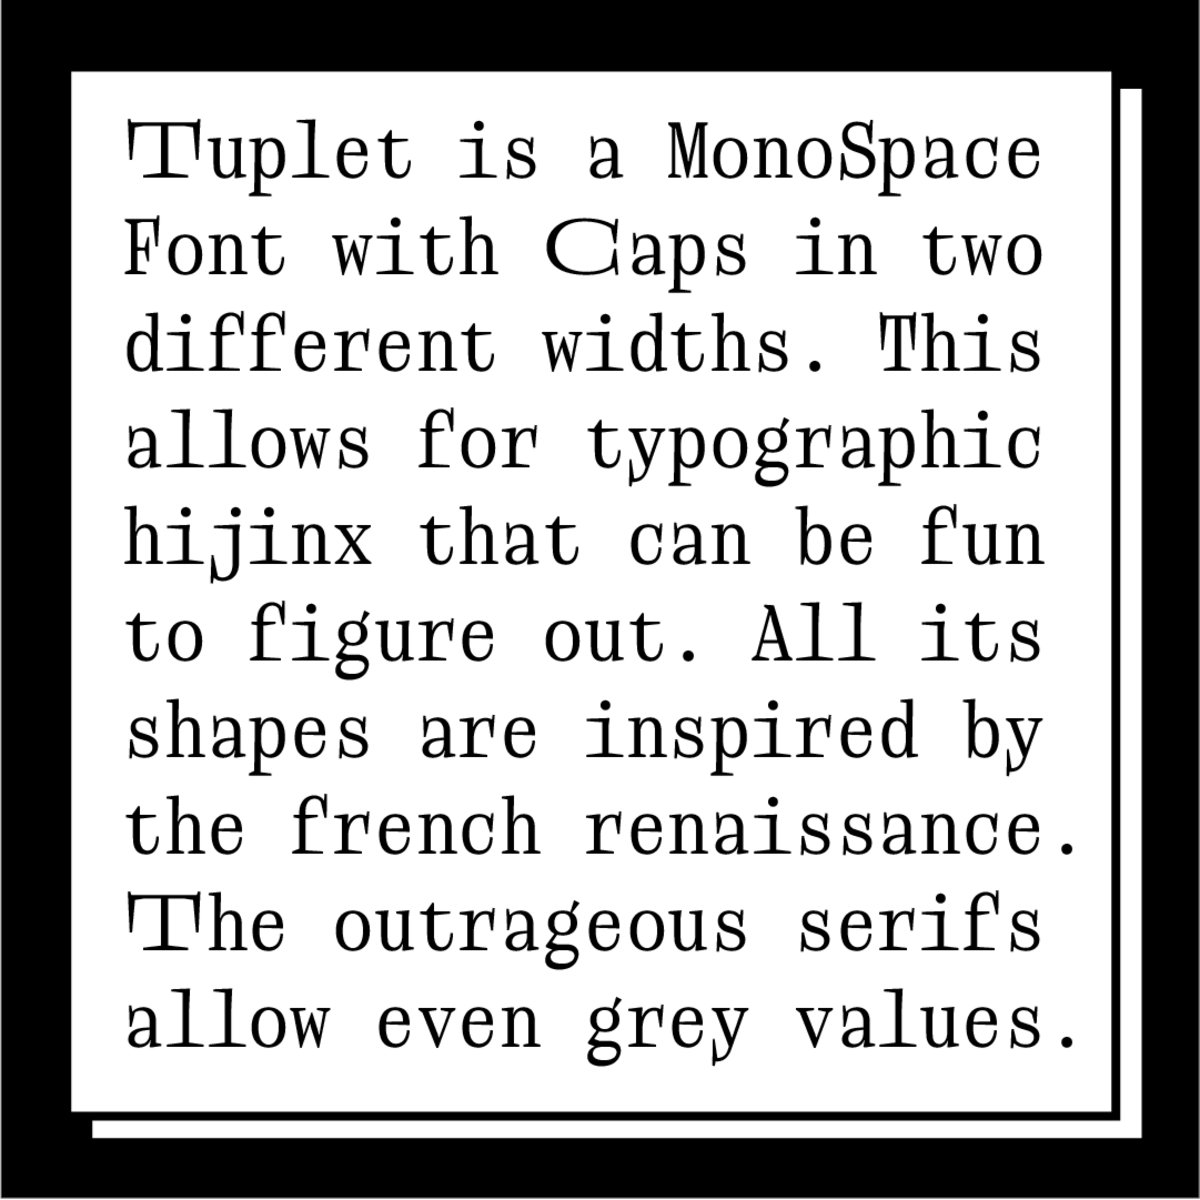 ✨NEW RELEASE✨ Tuplet by Jakob Fangmeier. This serif monospace, actually comes with a set of alternate double wide caps (SS01) to bring in some dynamic and funky proportions. Further down the line, this design will see some wild, swashy italics! futurefonts.xyz/jakob-fangmeie…